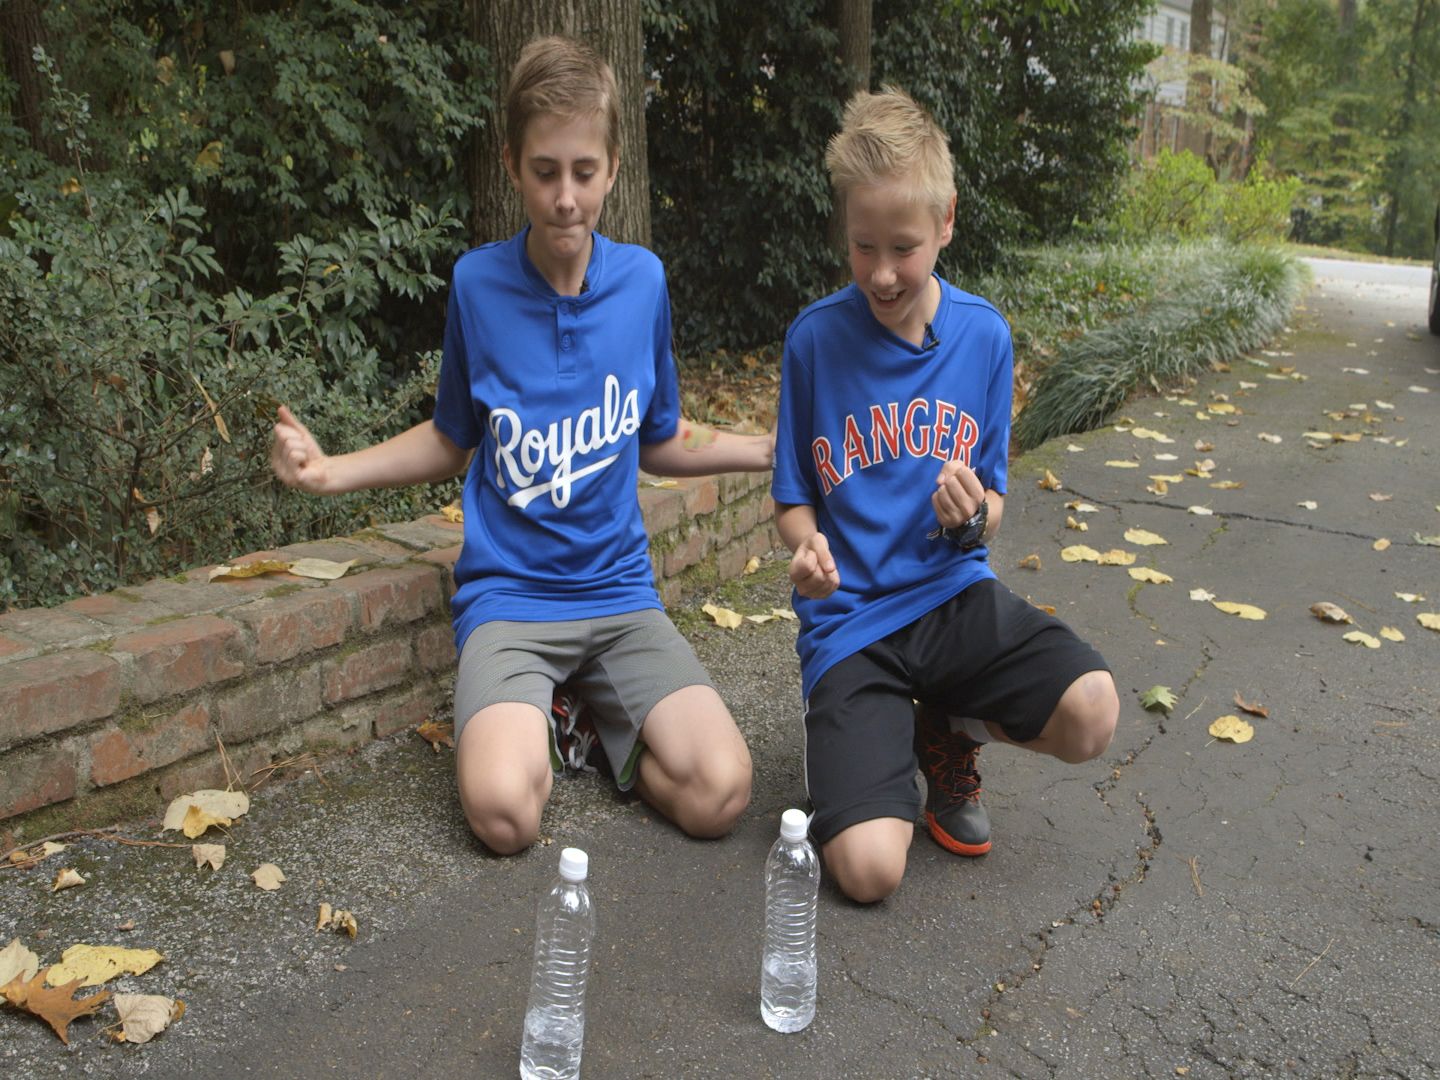 Bottle flipping: The craze that's driving parents crzay